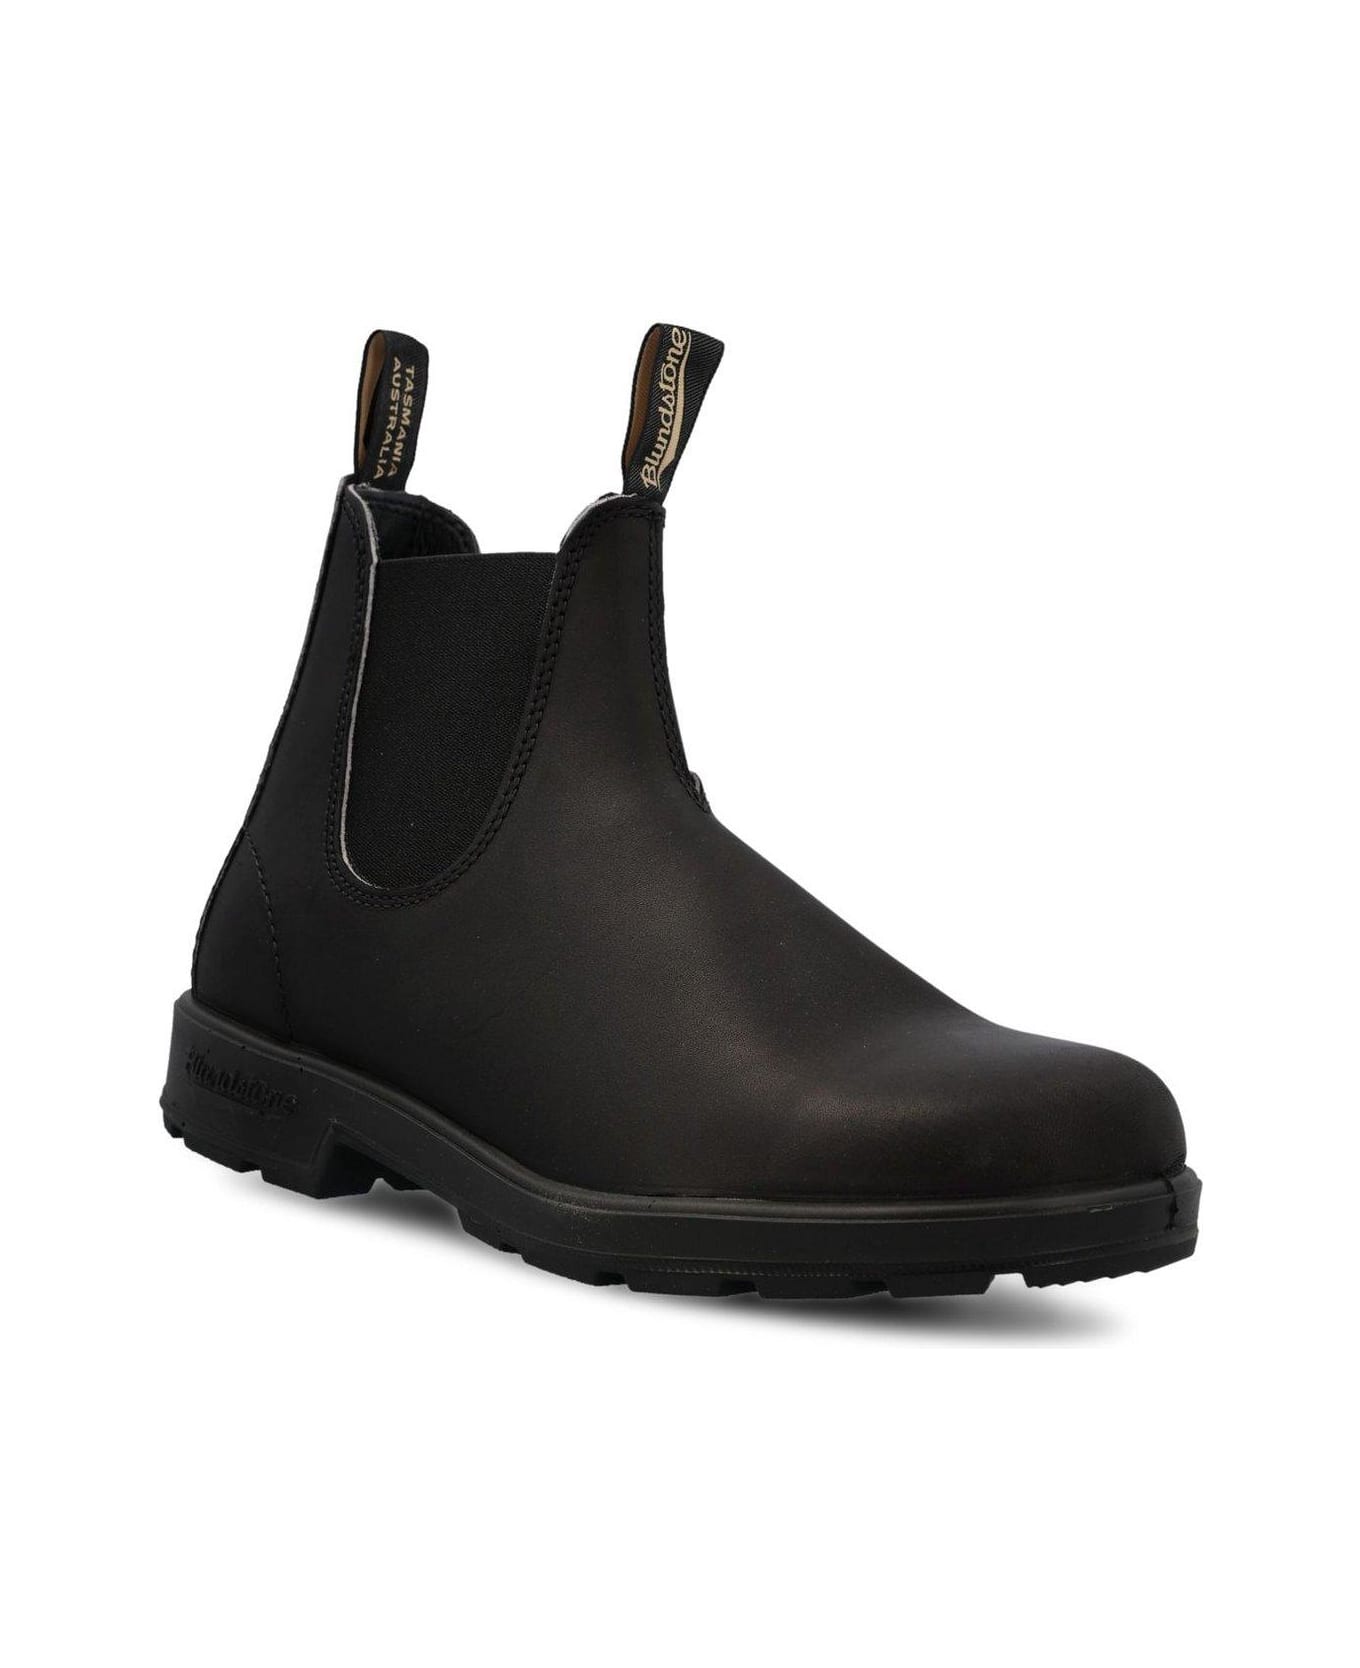 Blundstone Round-toe Ankle Boots - Black